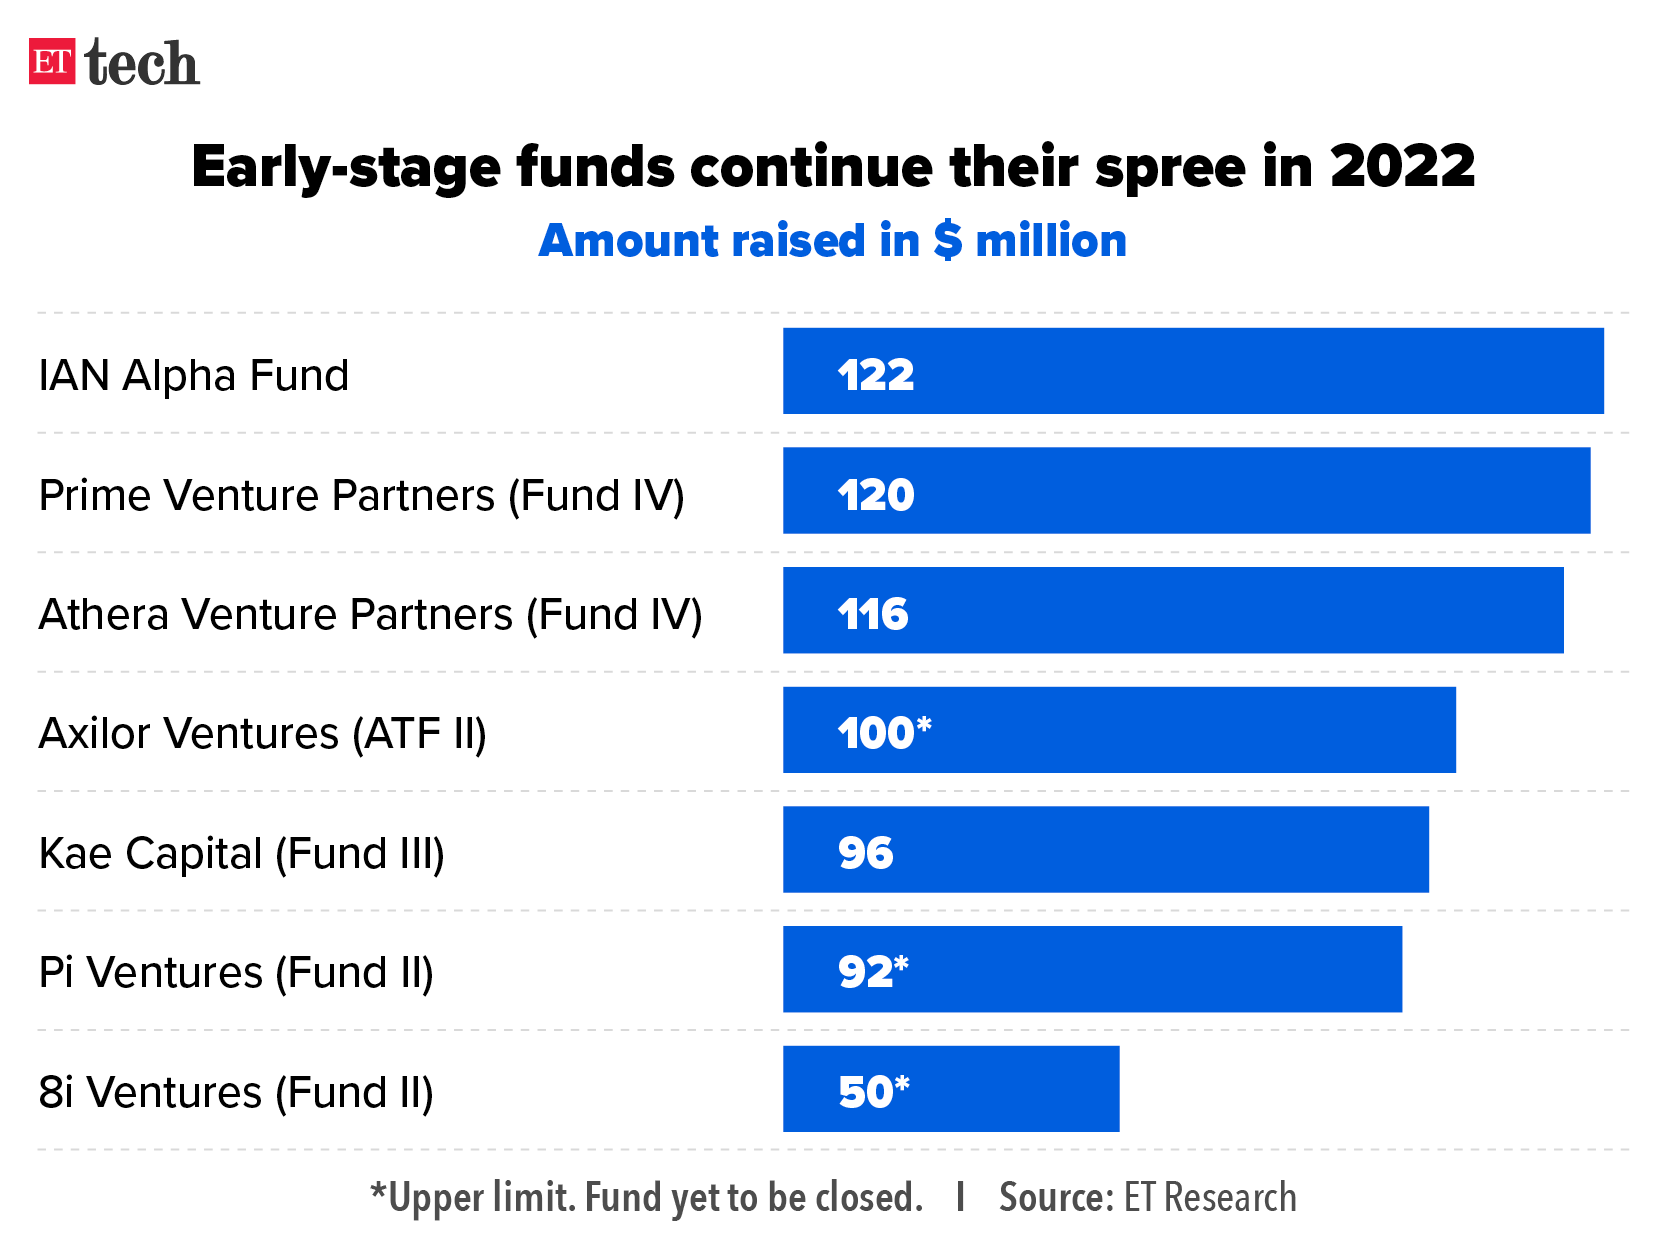 Early stage funds